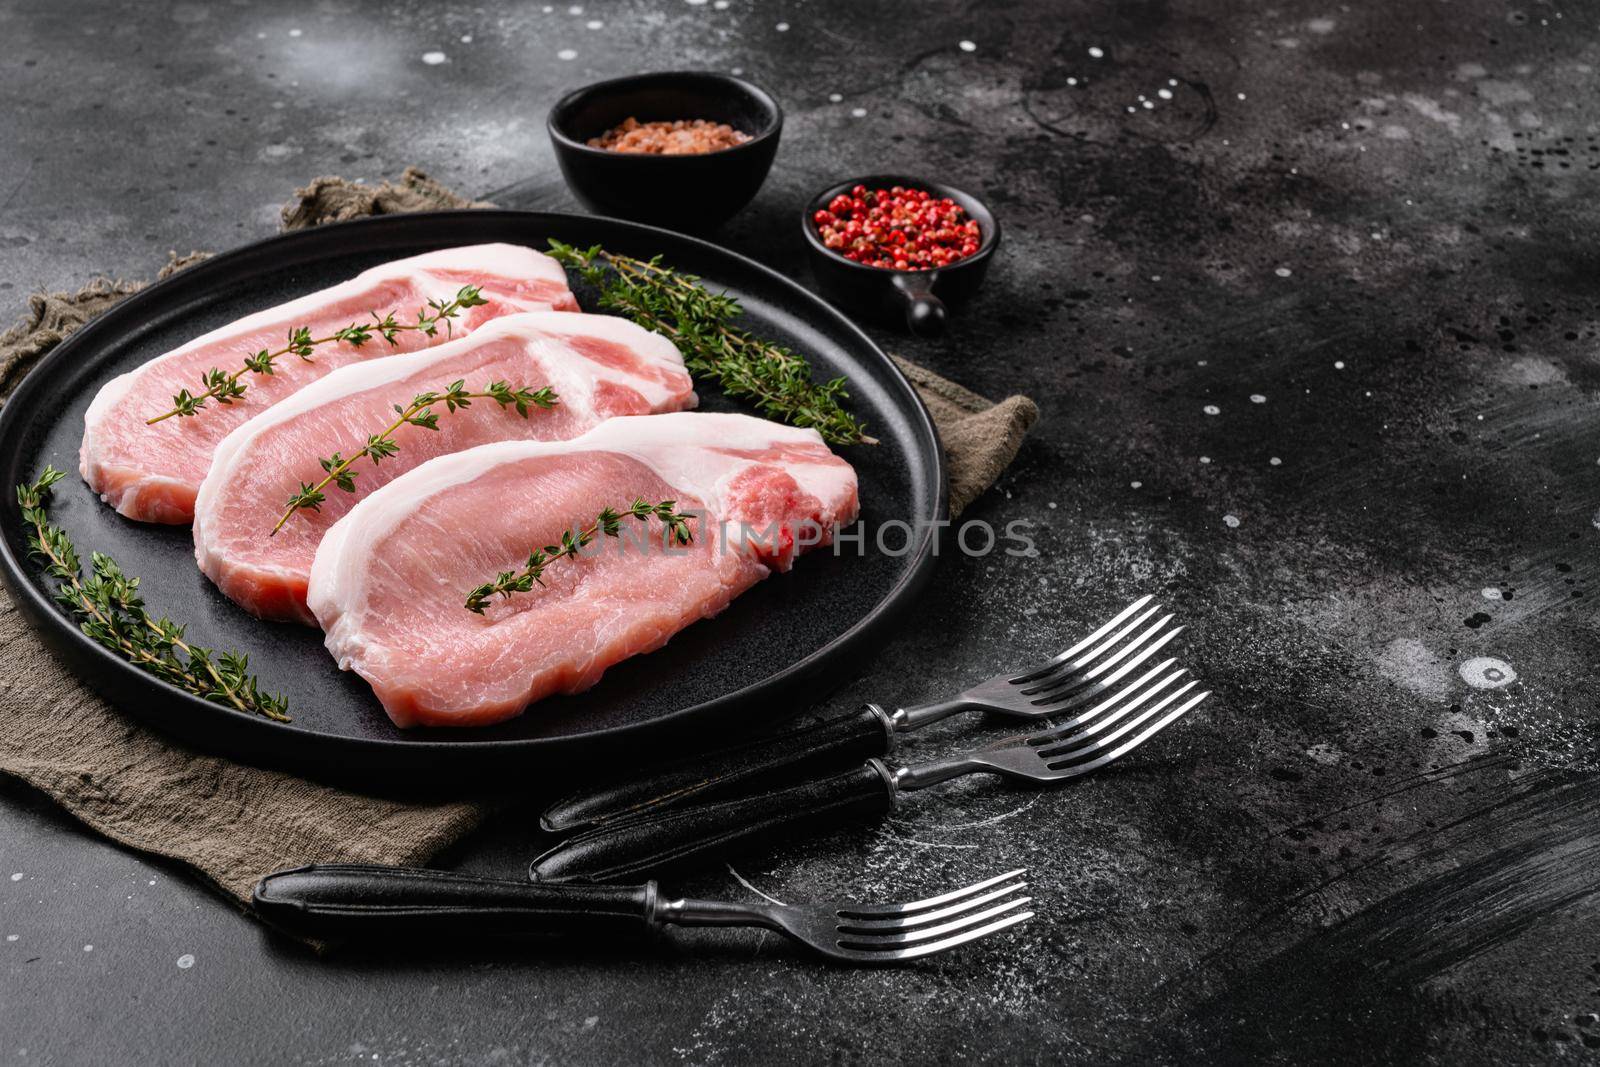 Raw pork steak ready for cooking with herbs, on black dark stone table background, with copy space for text by Ilianesolenyi